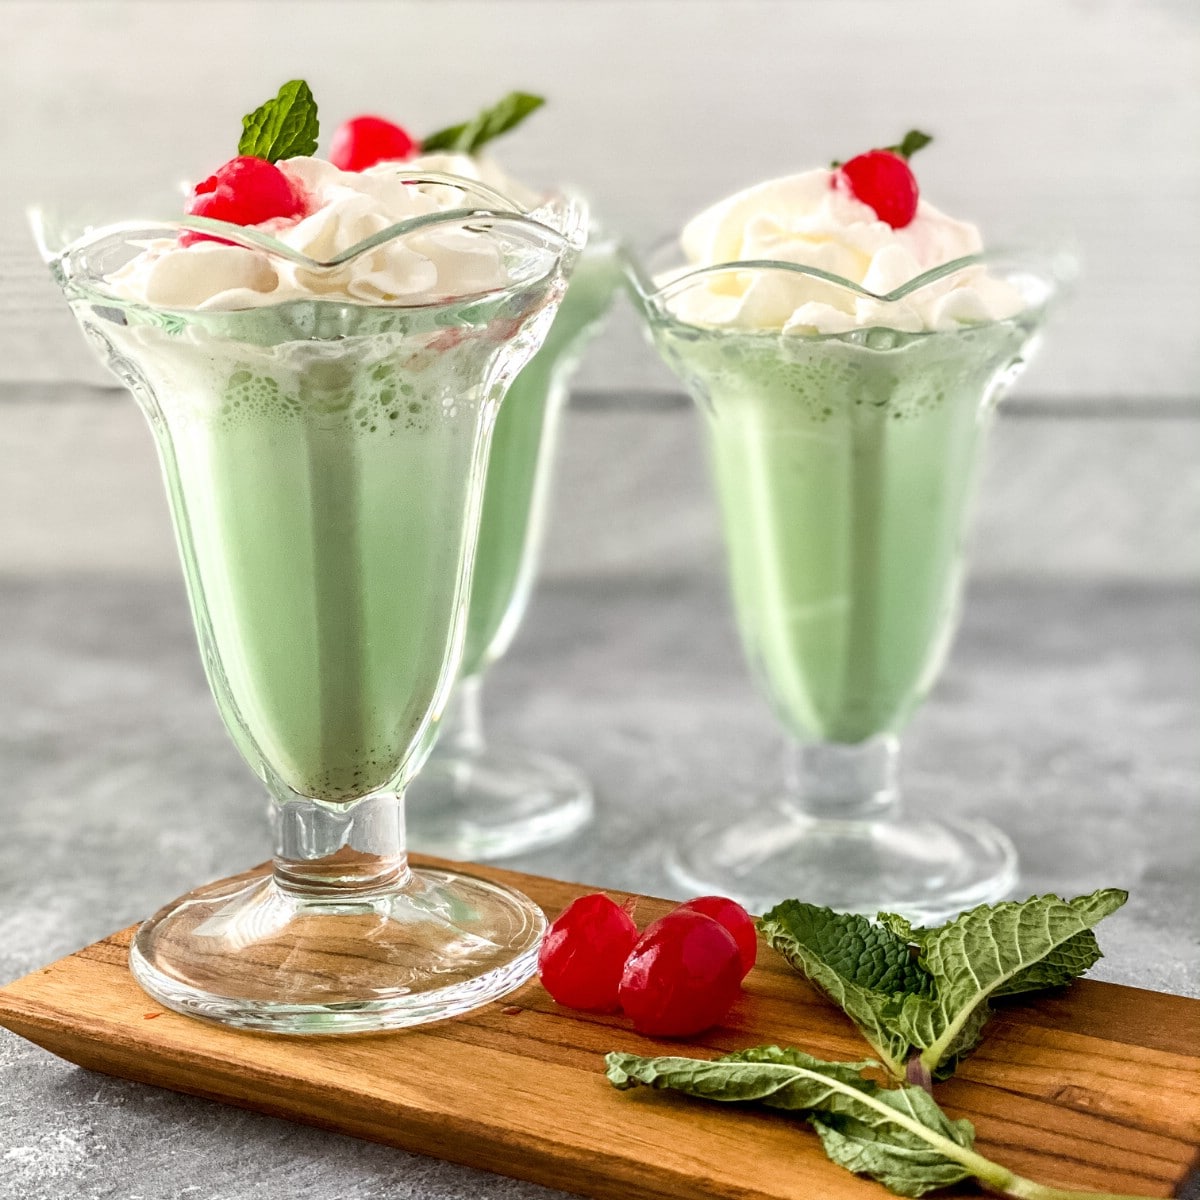 Tall clear glasses of green milkshake topped with cherry